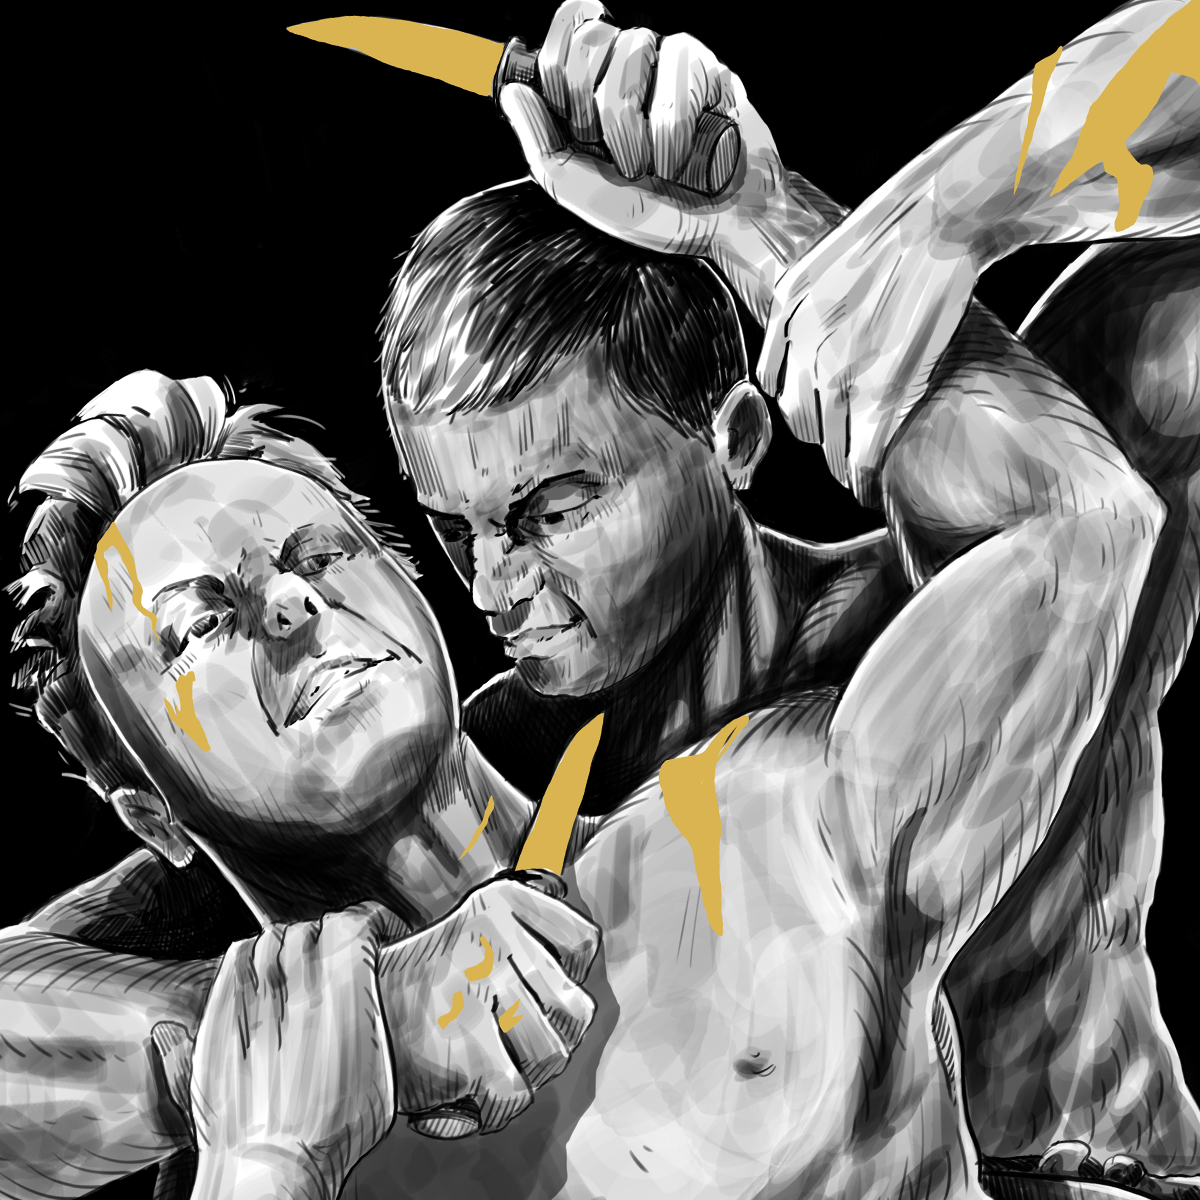 Image shows two figures fighting bare-chested. One has the other in a head lock, with a knife pressed to their throat. Gold gilds their blades, and they both have wounds dripping golden blood.